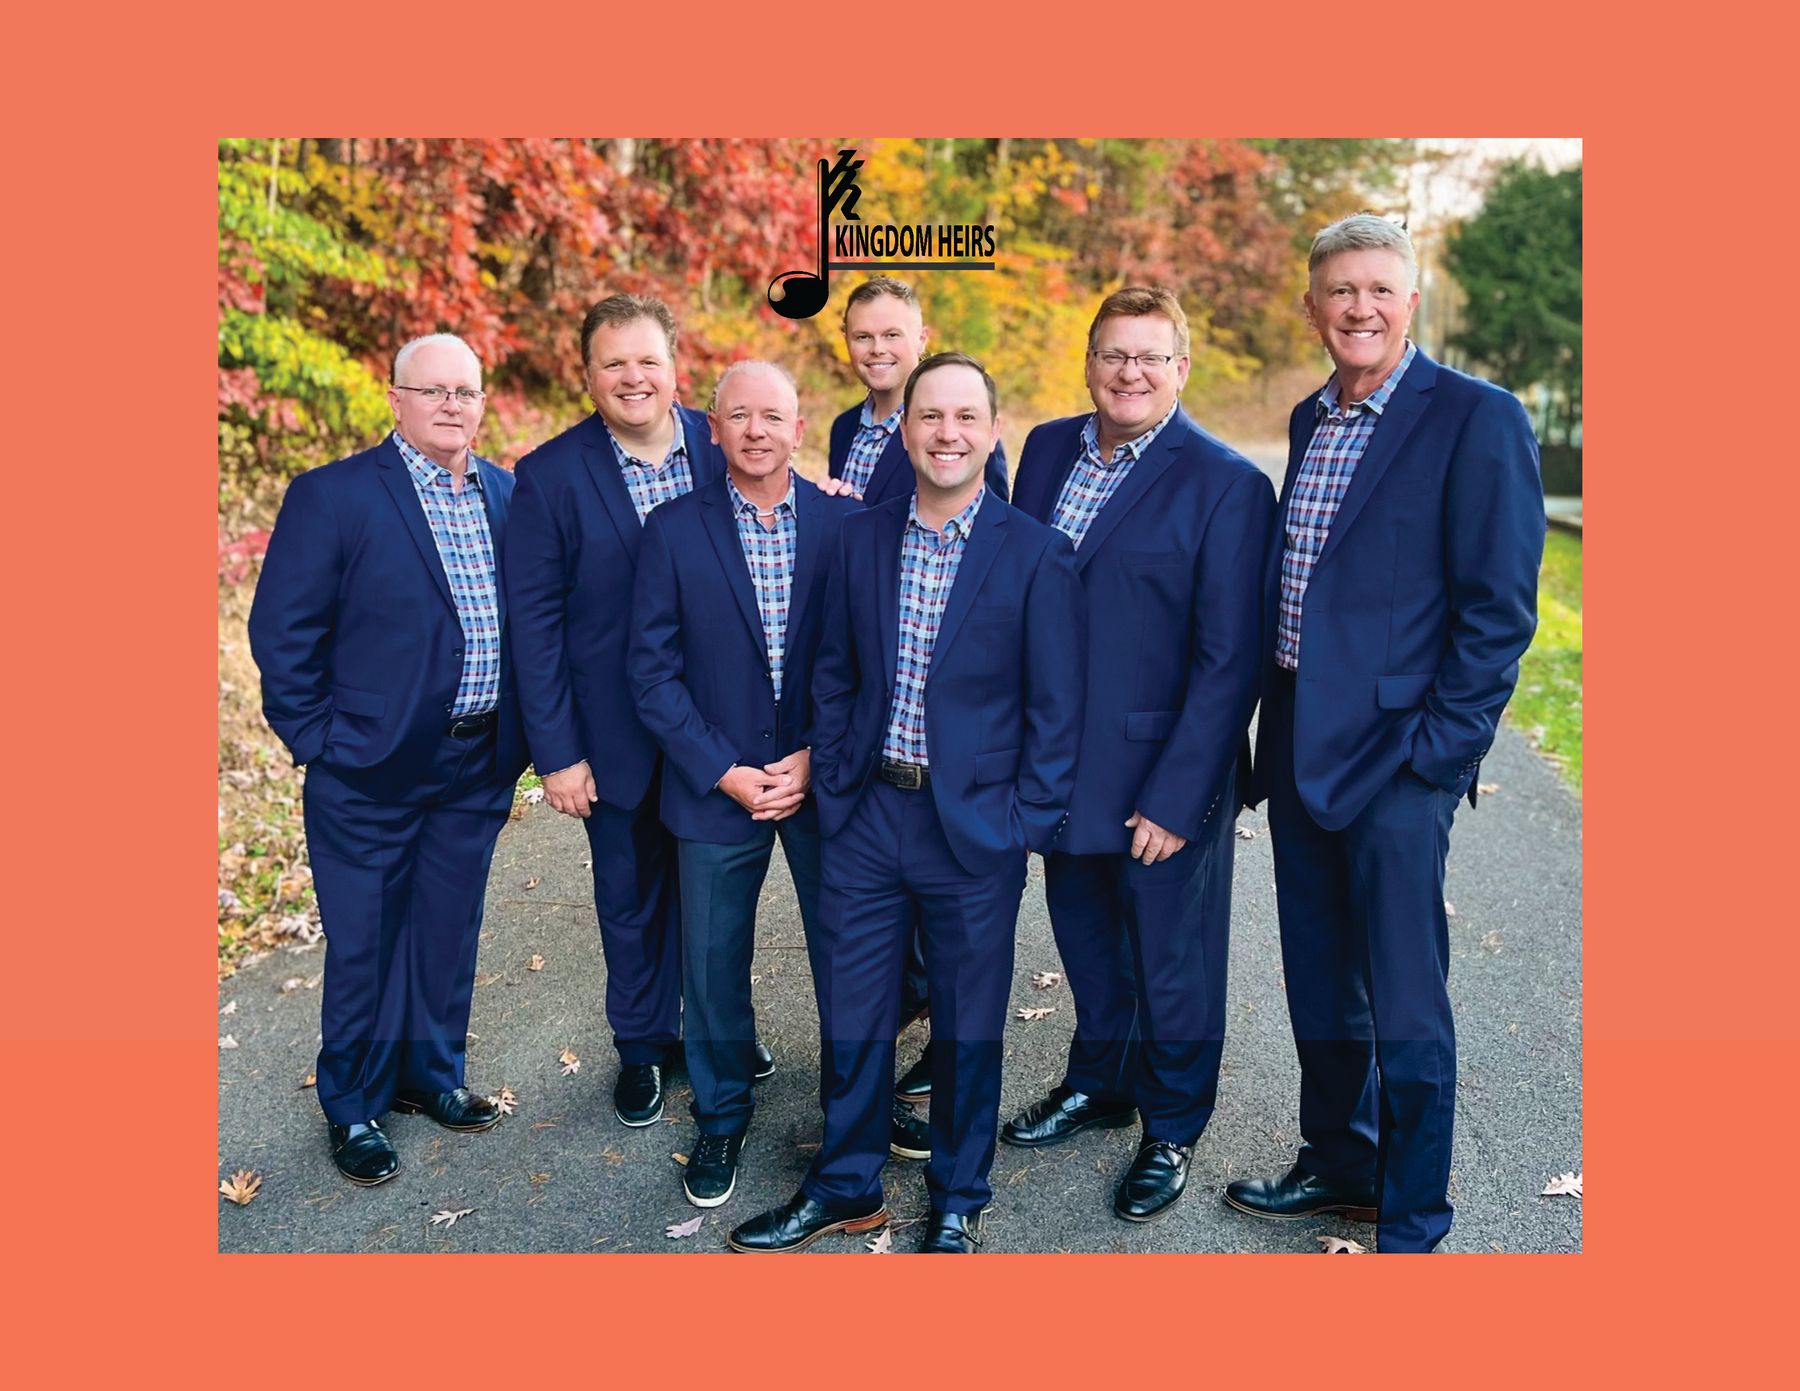 It's Here! The New 30th Year Anniversary CD From The Kingdom Heirs Has